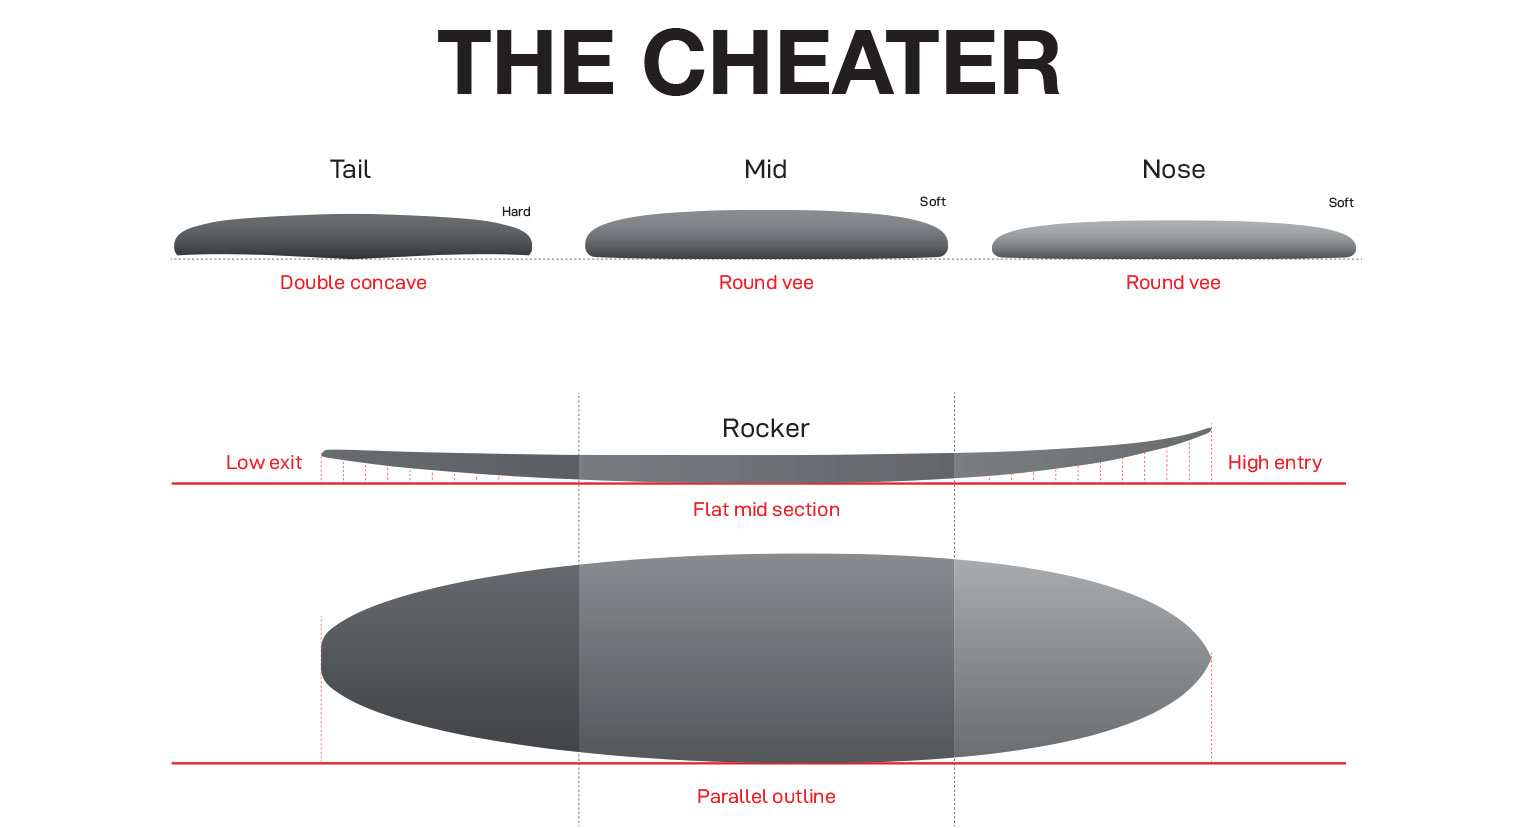 the cheater